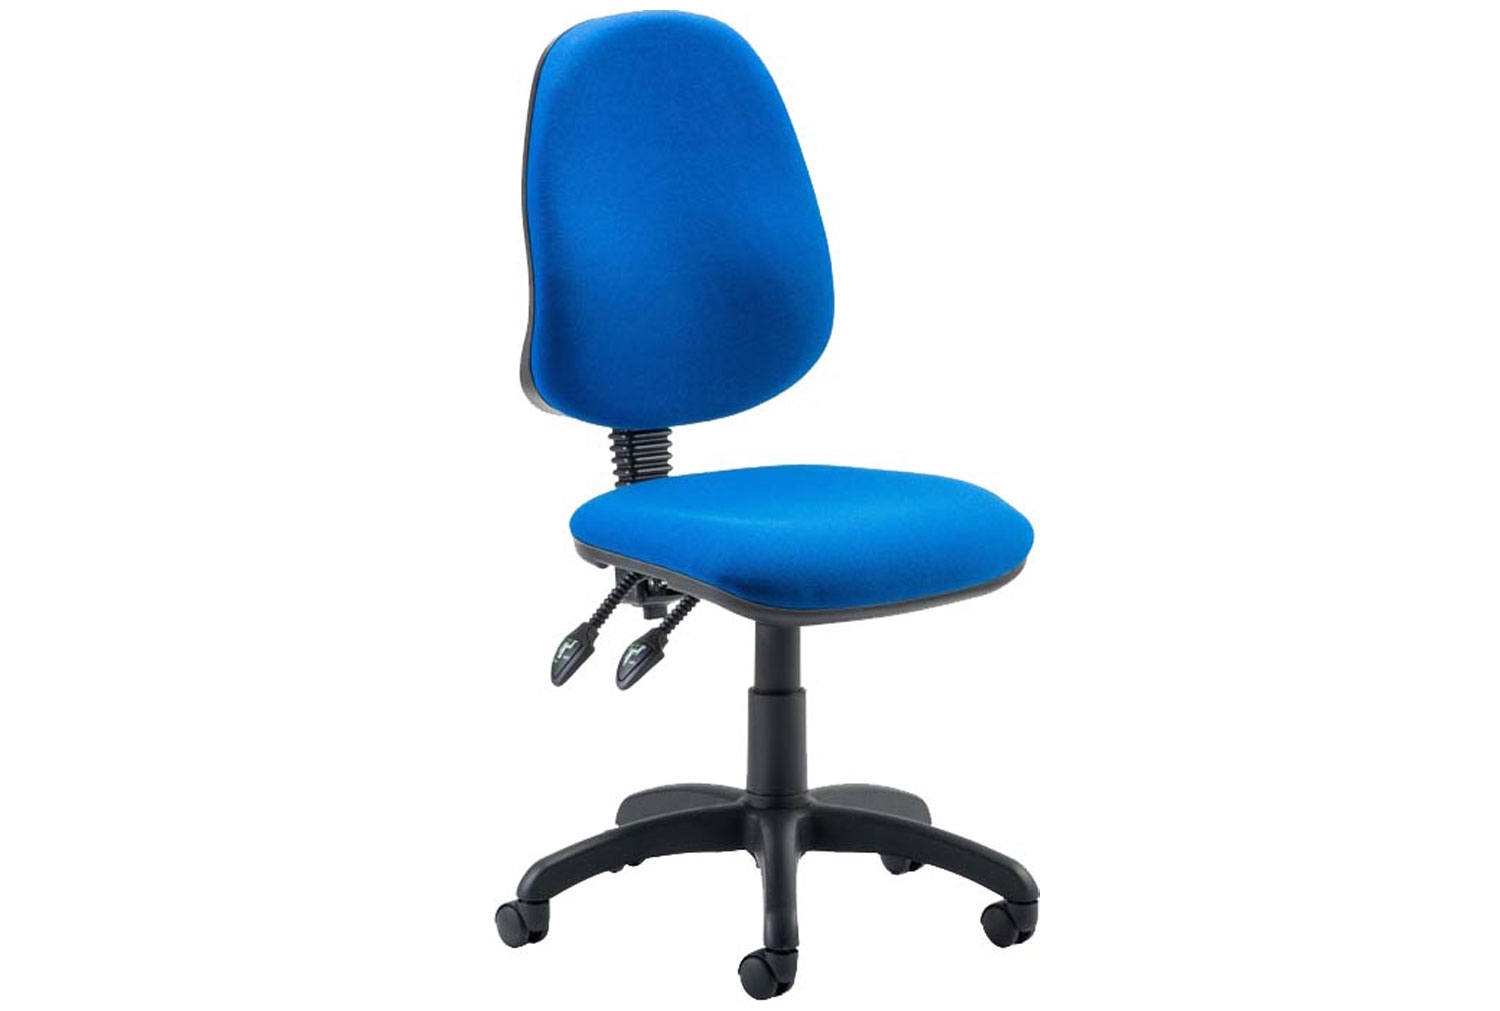 Lunar 2 Lever Operator Office Chair With No Arms, Blue